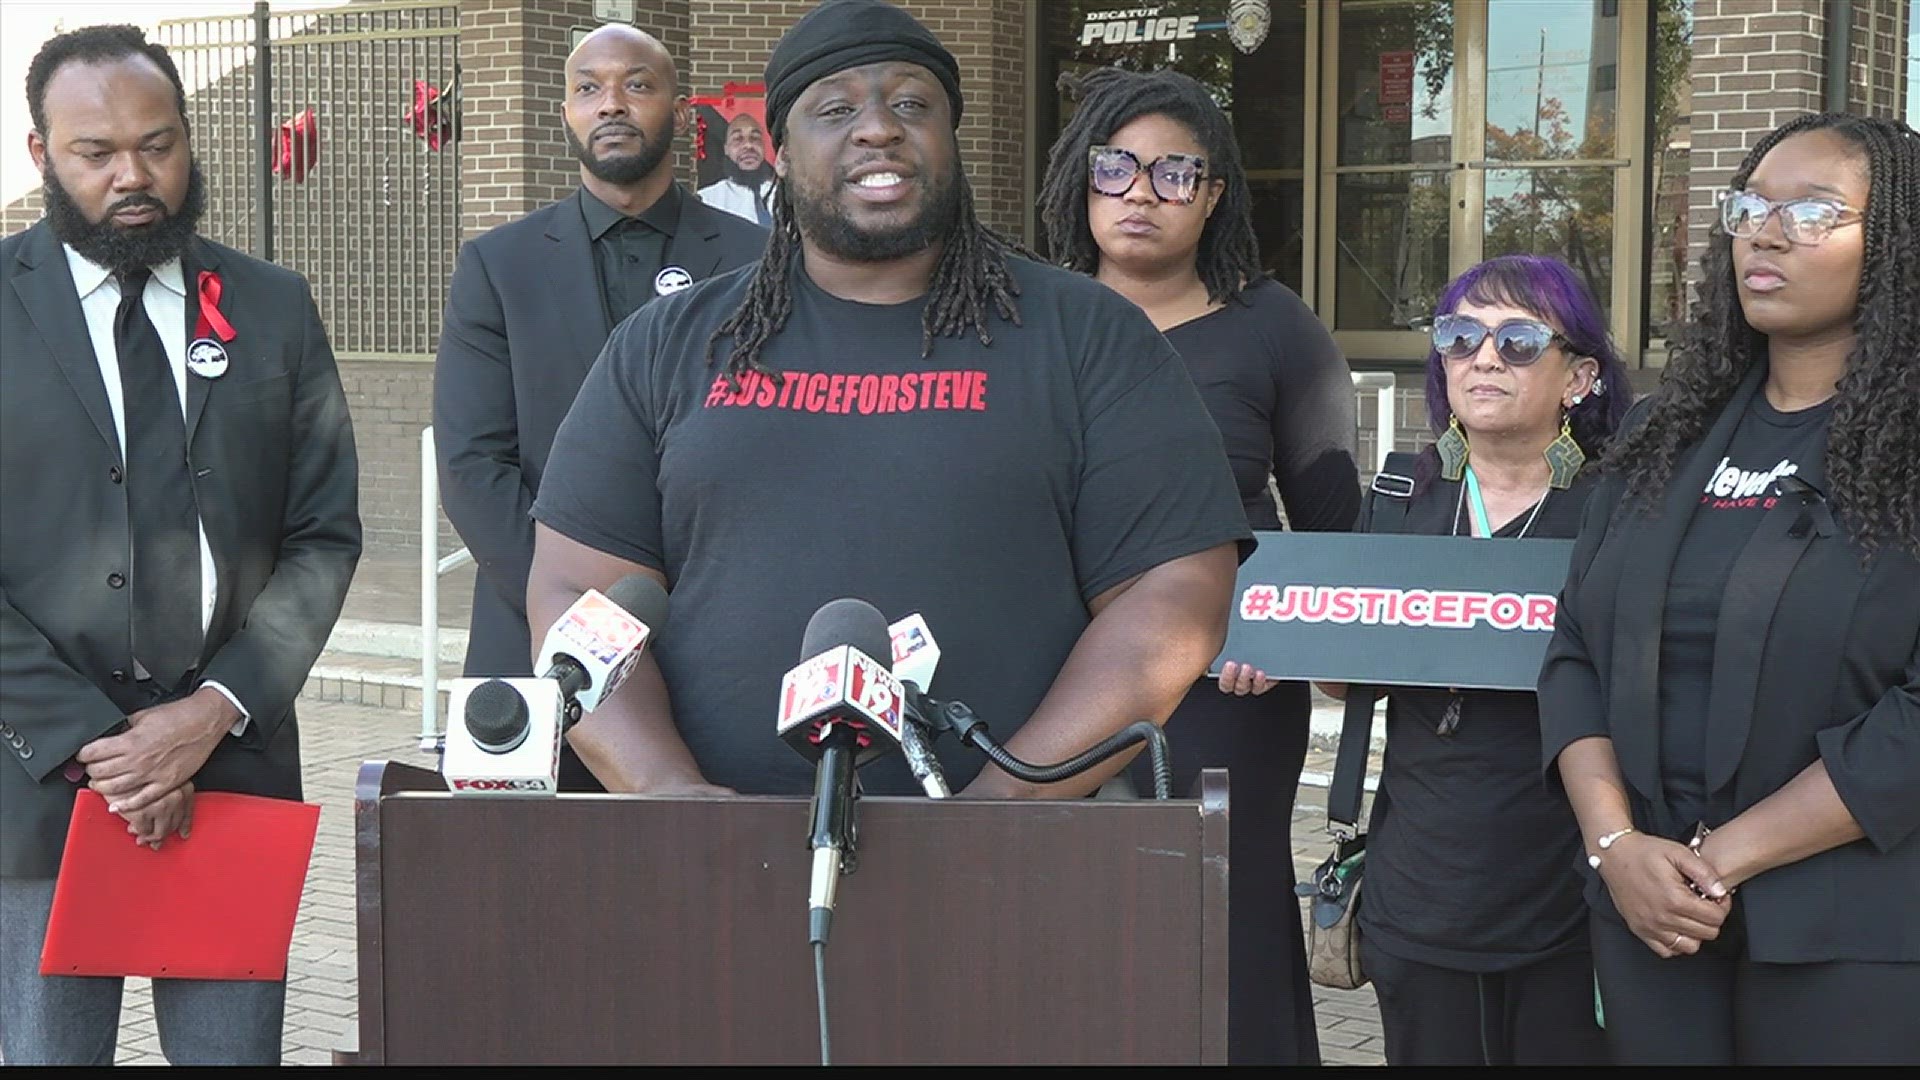 A racial justice group calls for transparency in the Decatur officer-involved shooting death of Steve Perkins and alleges false arrests in the search for answers.